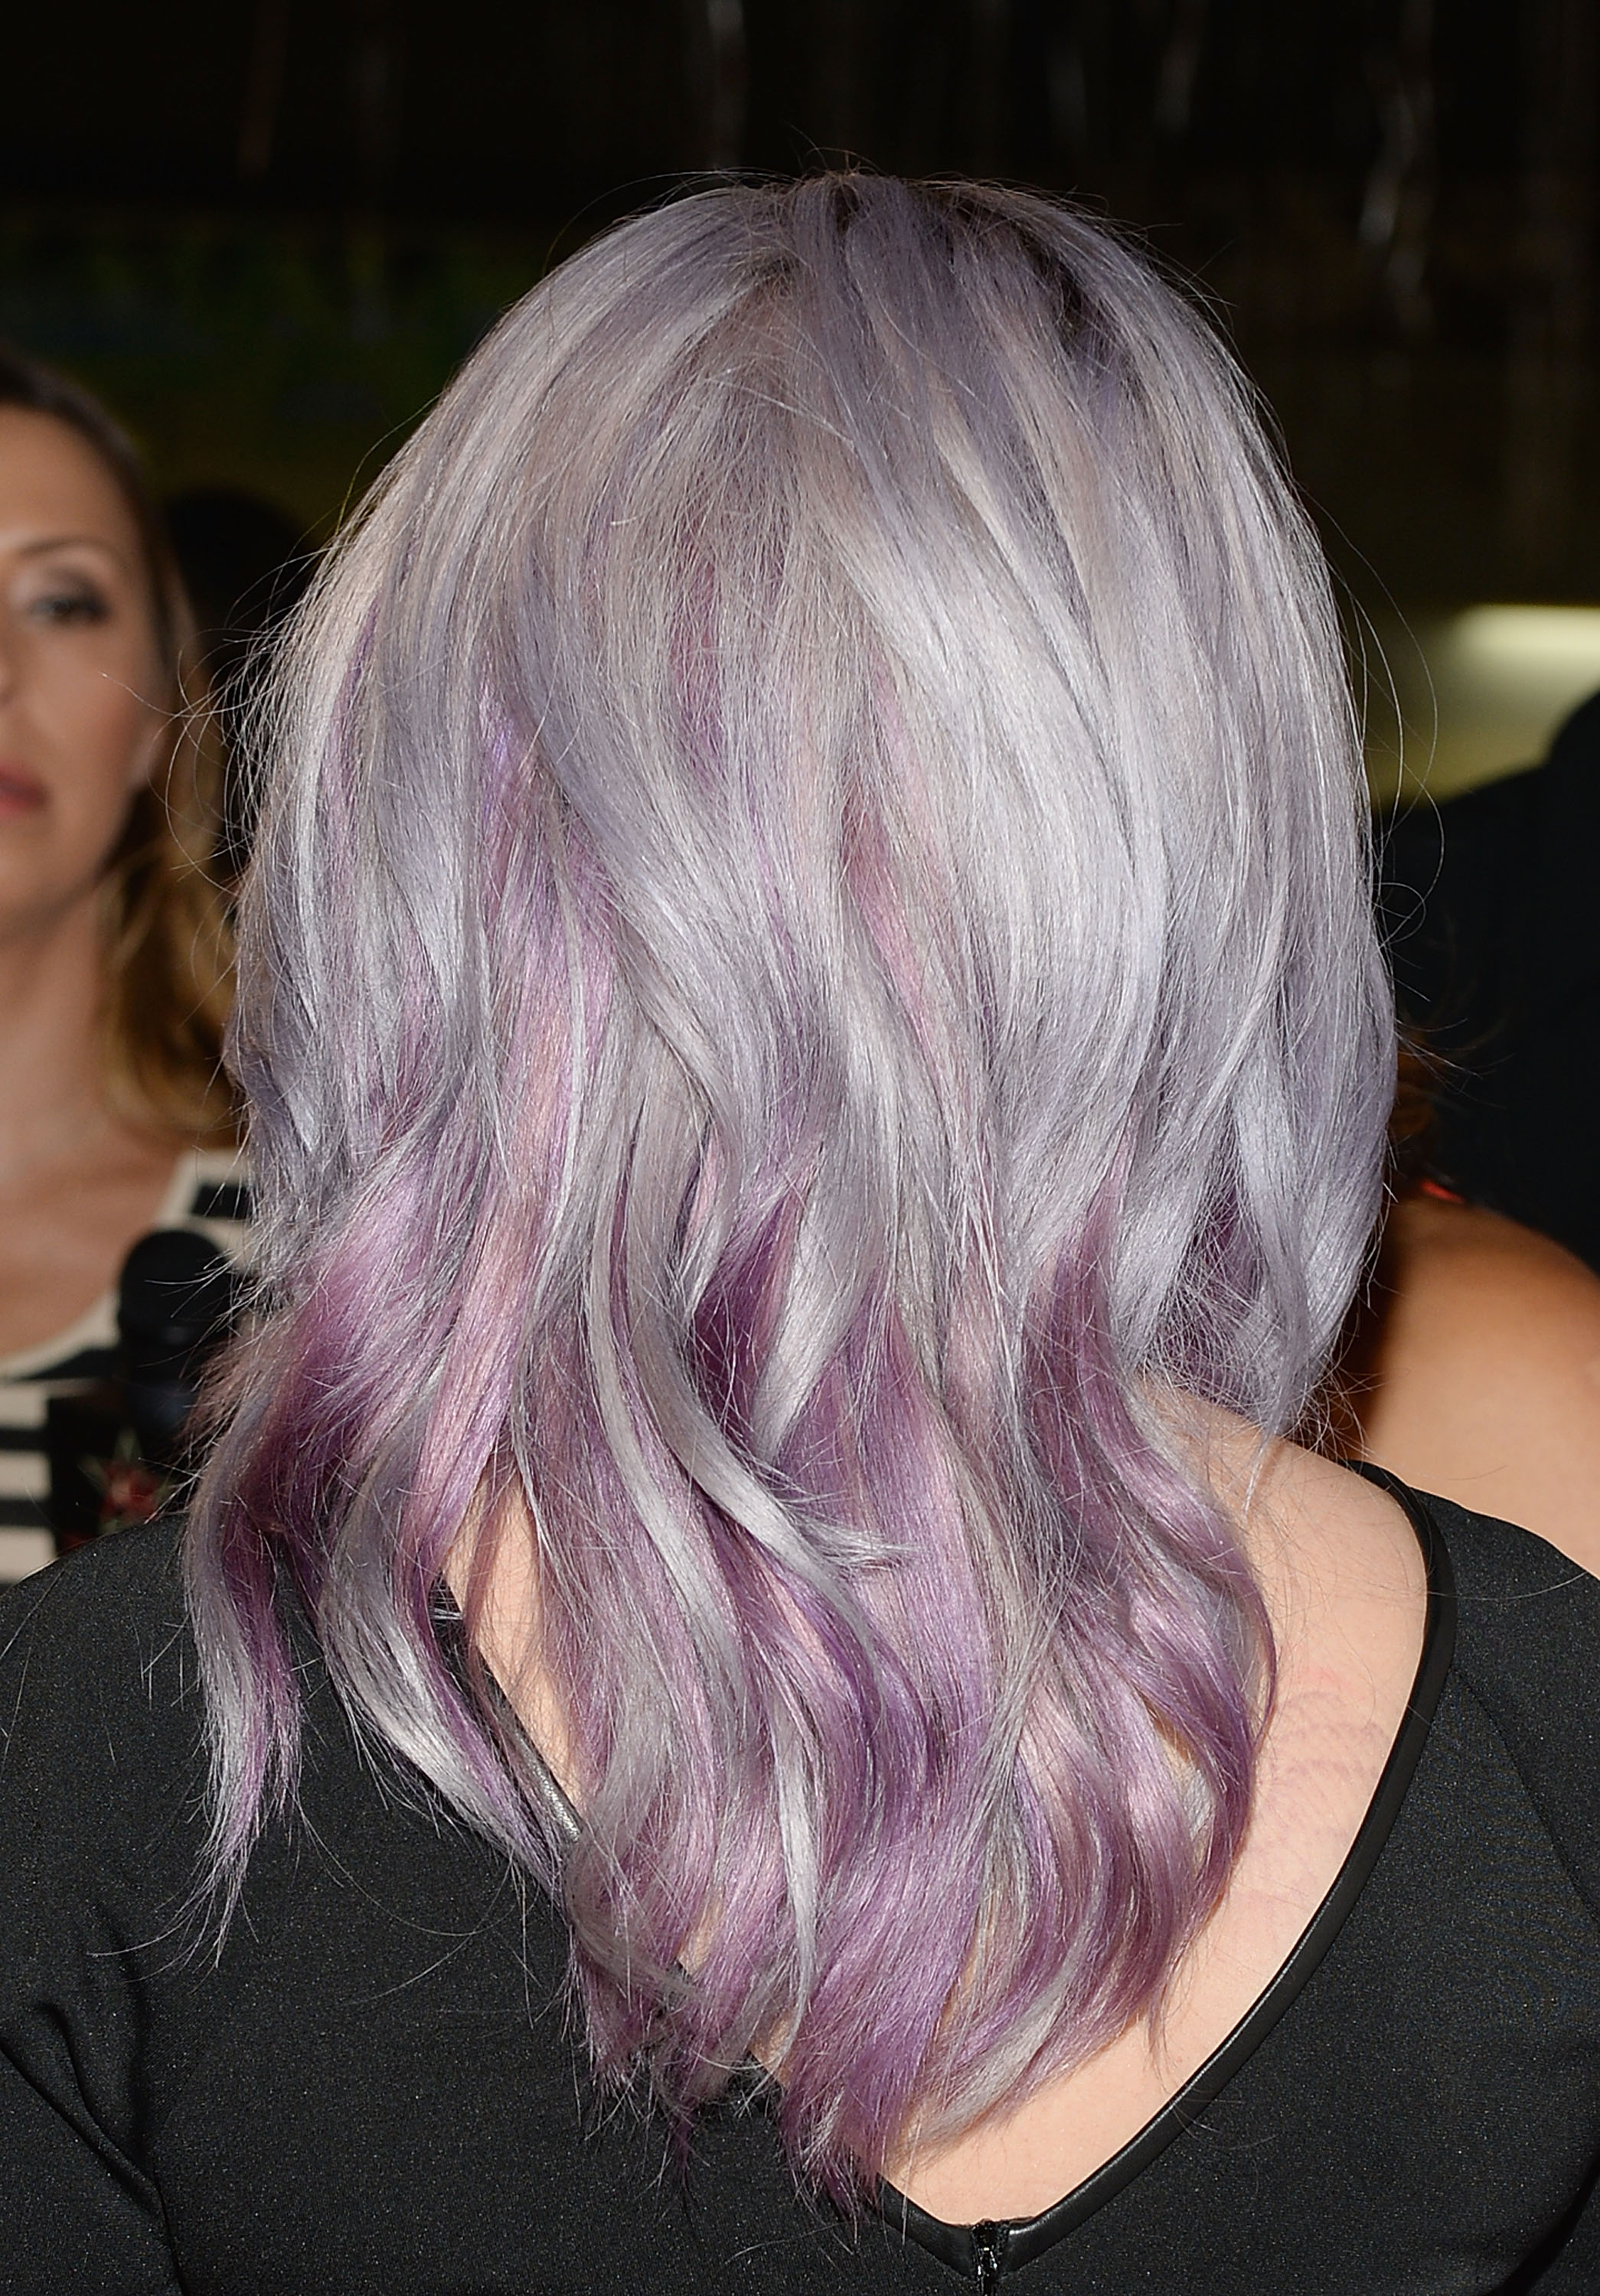 What Is Color Melting? Meet The Hair Dye Trend That Will Rule 2016 — PHOTOS